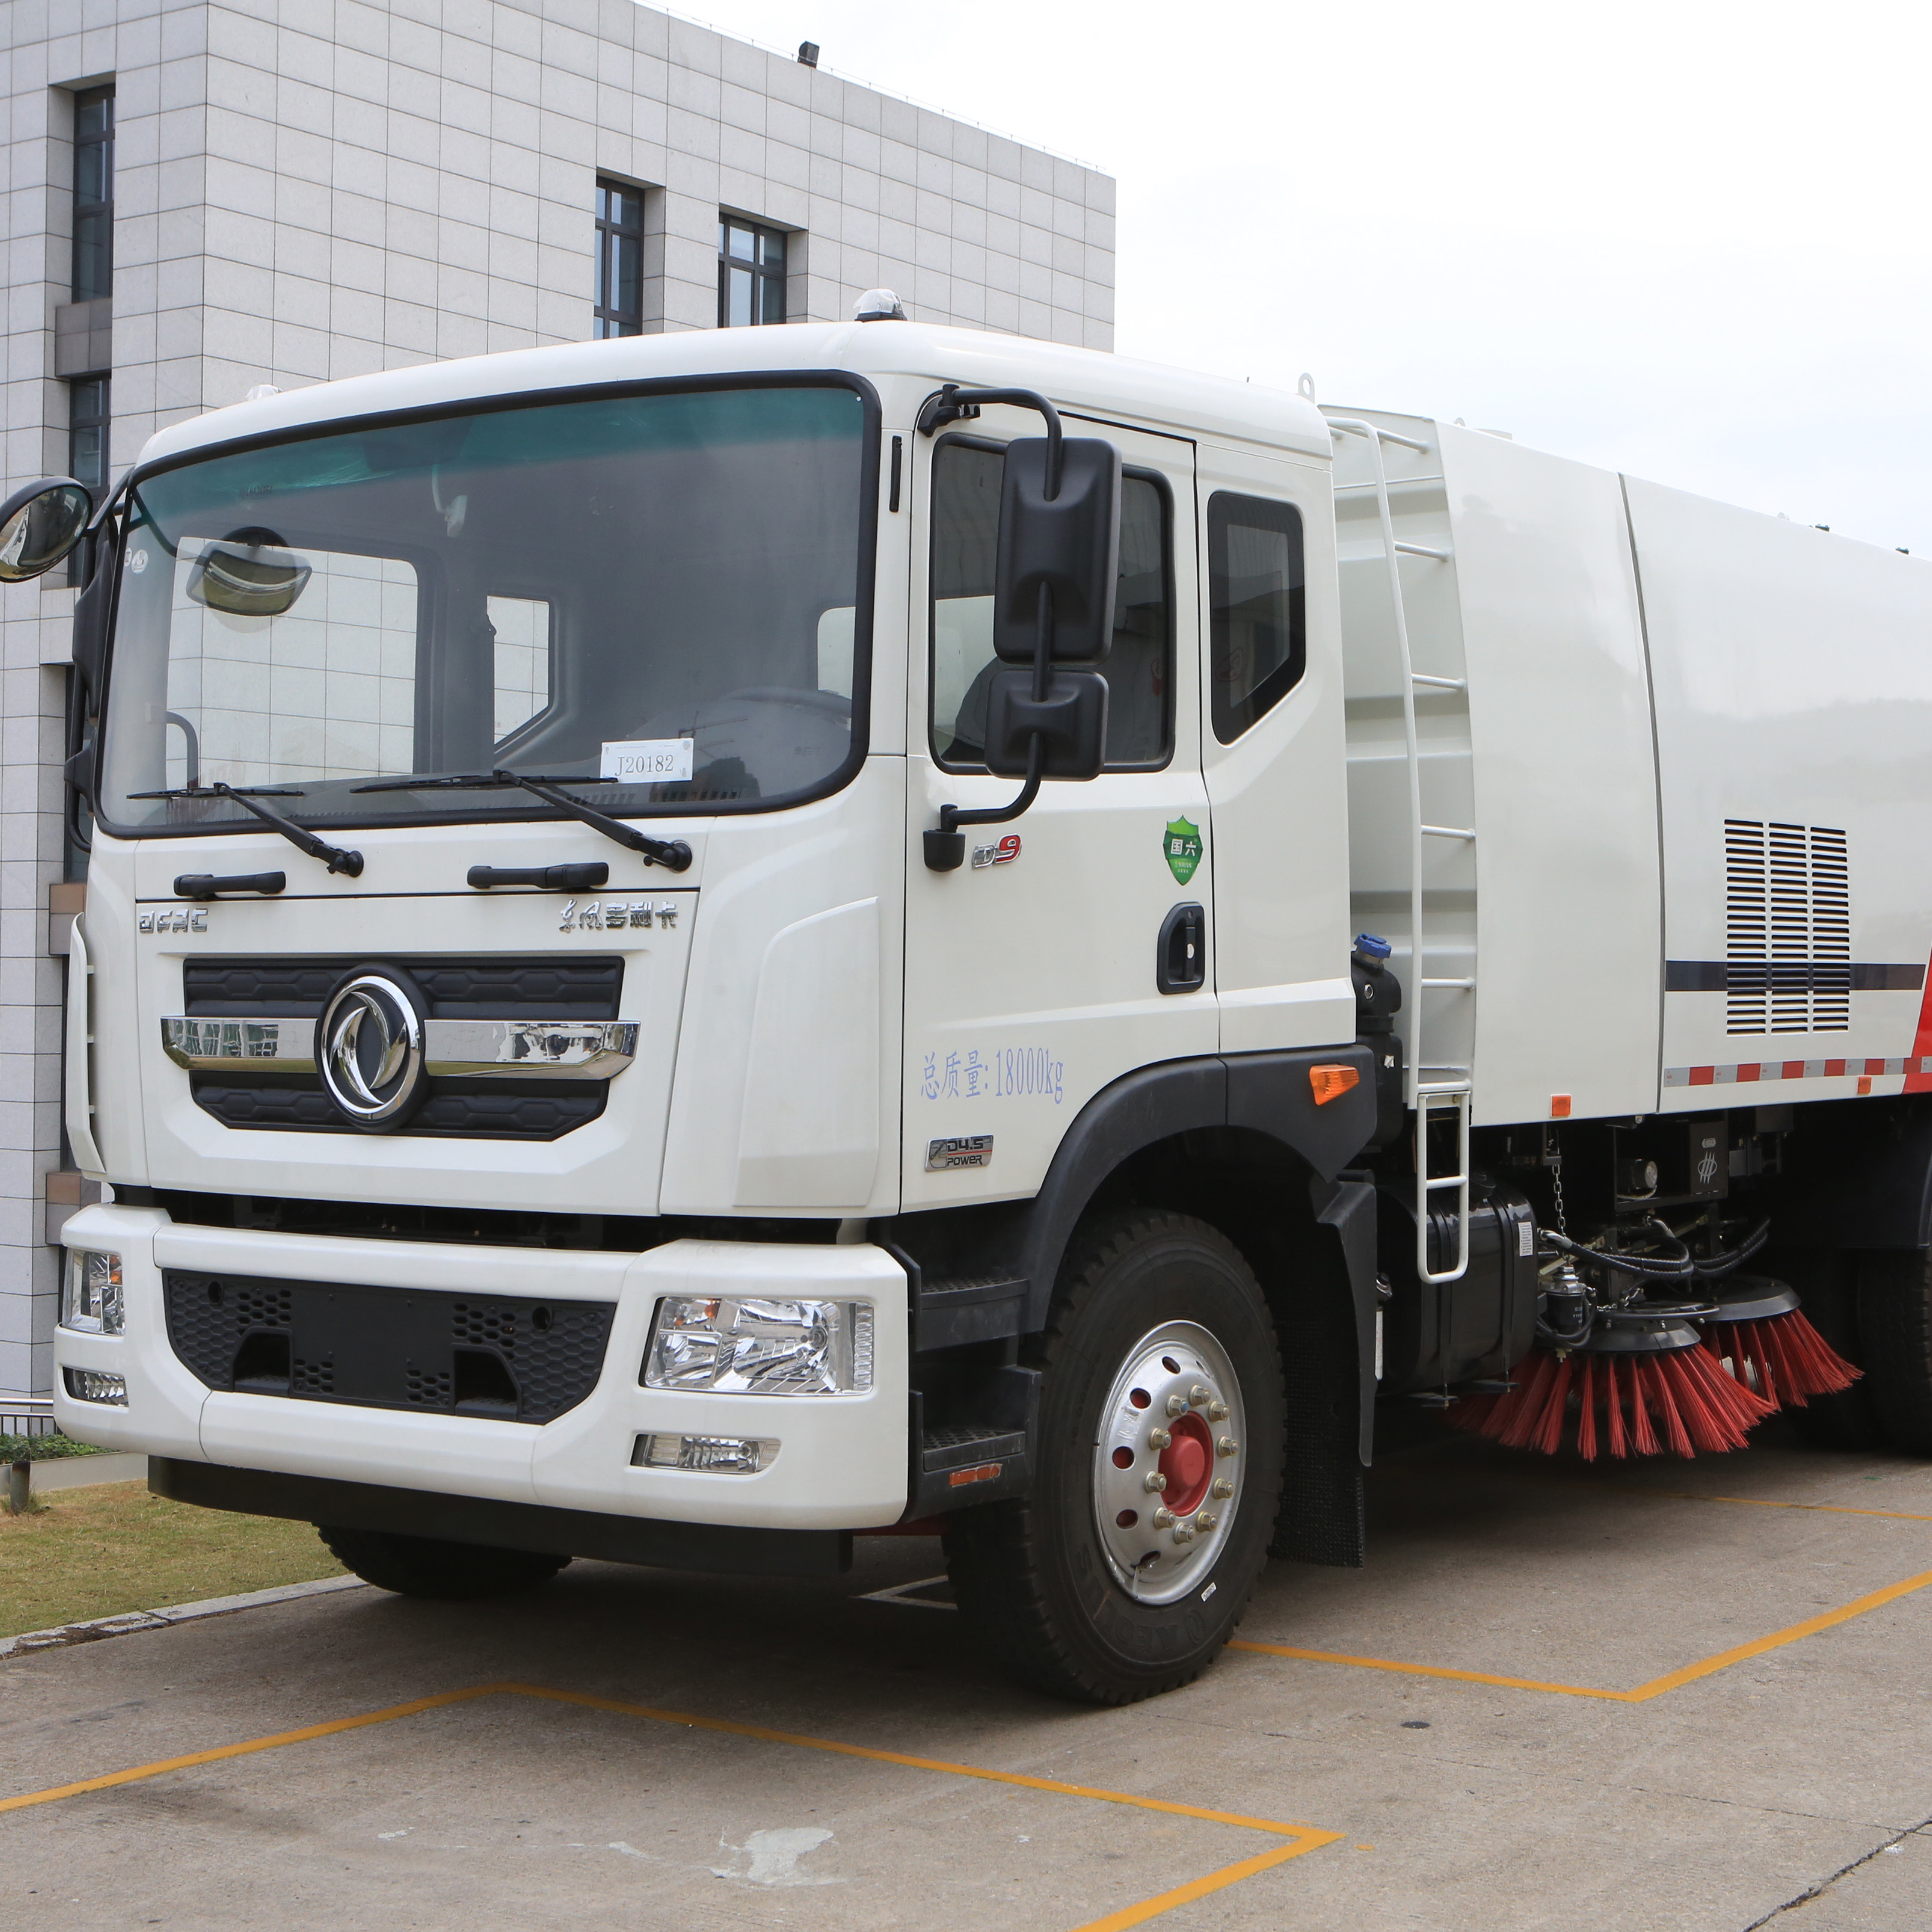 FULONGMA road sweeper function, configuration and working video